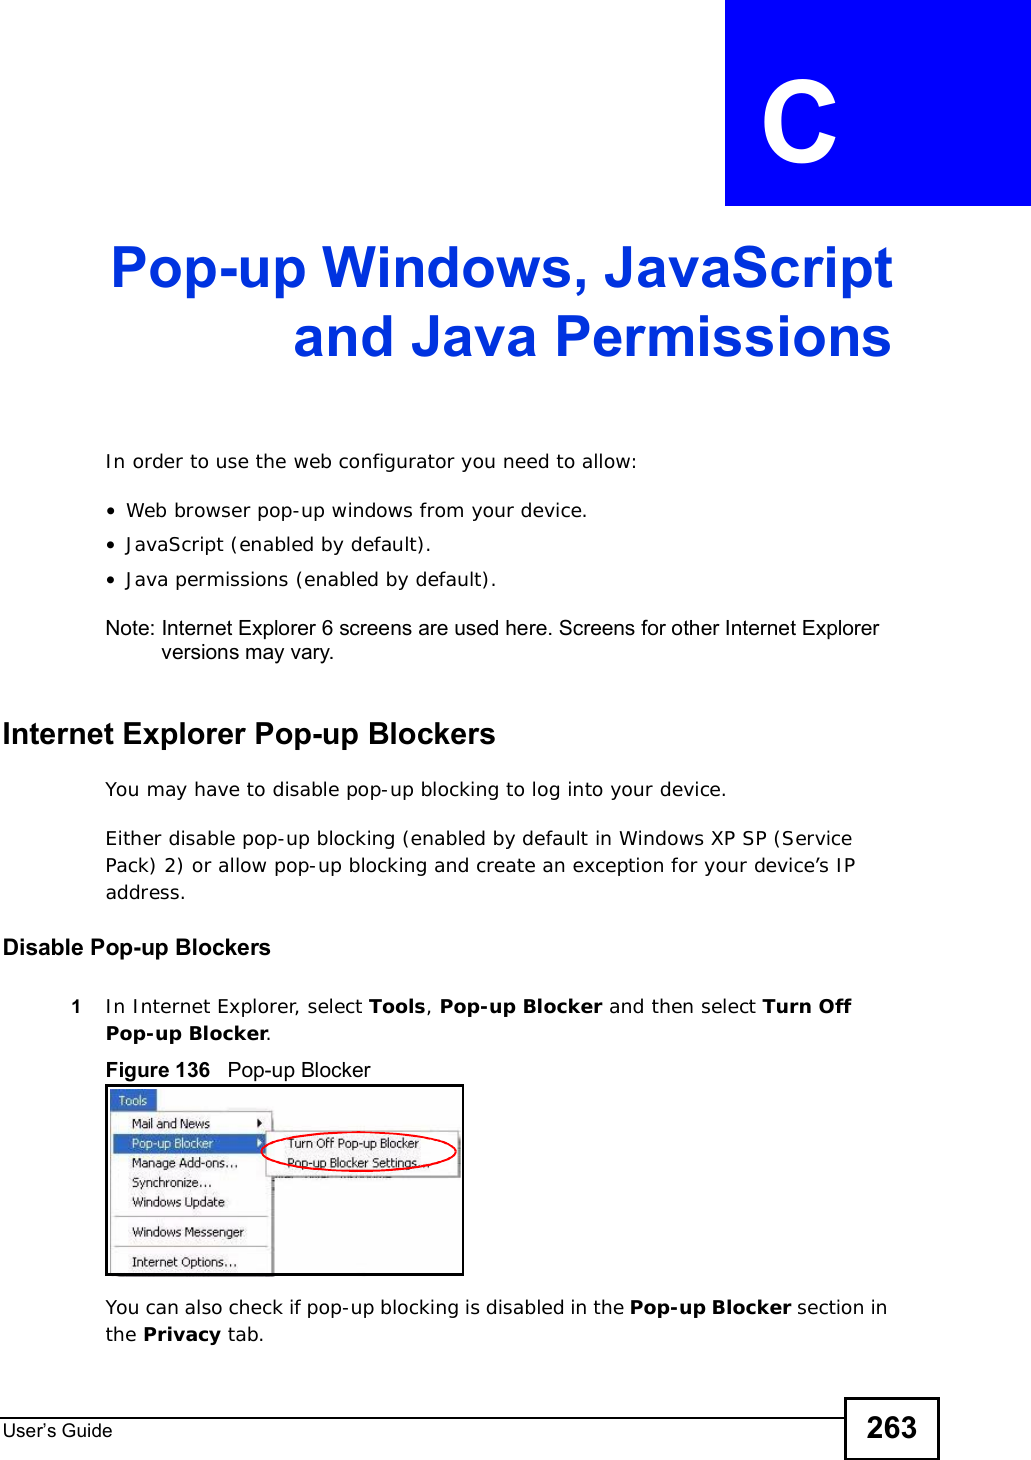 User s Guide 263APPENDIX  C Pop-up Windows, JavaScriptand Java PermissionsIn order to use the web configurator you need to allow:•Web browser pop-up windows from your device.•JavaScript (enabled by default).•Java permissions (enabled by default).Note: Internet Explorer 6 screens are used here. Screens for other Internet Explorer versions may vary.Internet Explorer Pop-up BlockersYou may have to disable pop-up blocking to log into your device. Either disable pop-up blocking (enabled by default in Windows XP SP (Service Pack) 2) or allow pop-up blocking and create an exception for your device’s IP address.Disable Pop-up Blockers1In Internet Explorer, select Tools,Pop-up Blocker and then select Turn Off Pop-up Blocker.Figure 136   Pop-up BlockerYou can also check if pop-up blocking is disabled in the Pop-up Blocker section in the Privacy tab. 